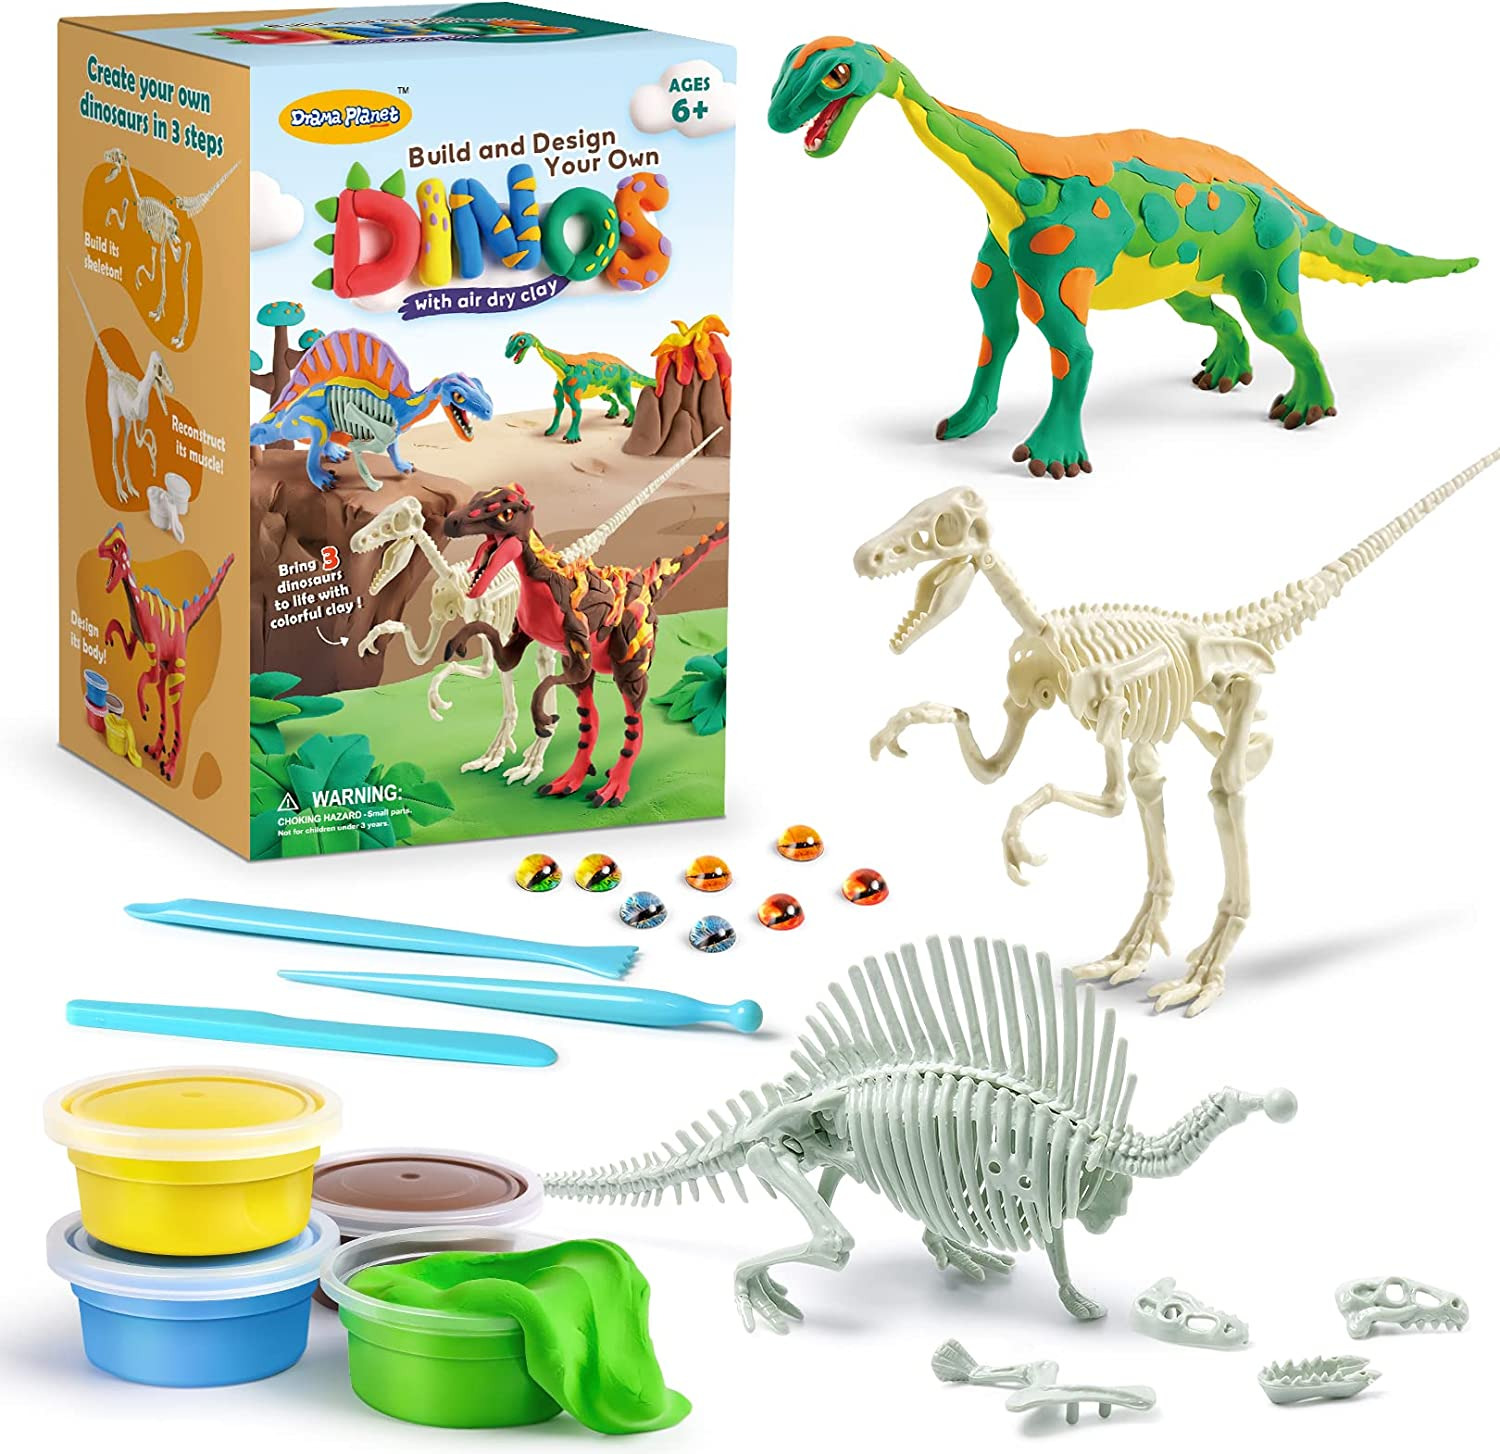 Air Dry Clay Dinosaur Craft Kit for Kids, Build and Design Your Own Dinosaurs wi